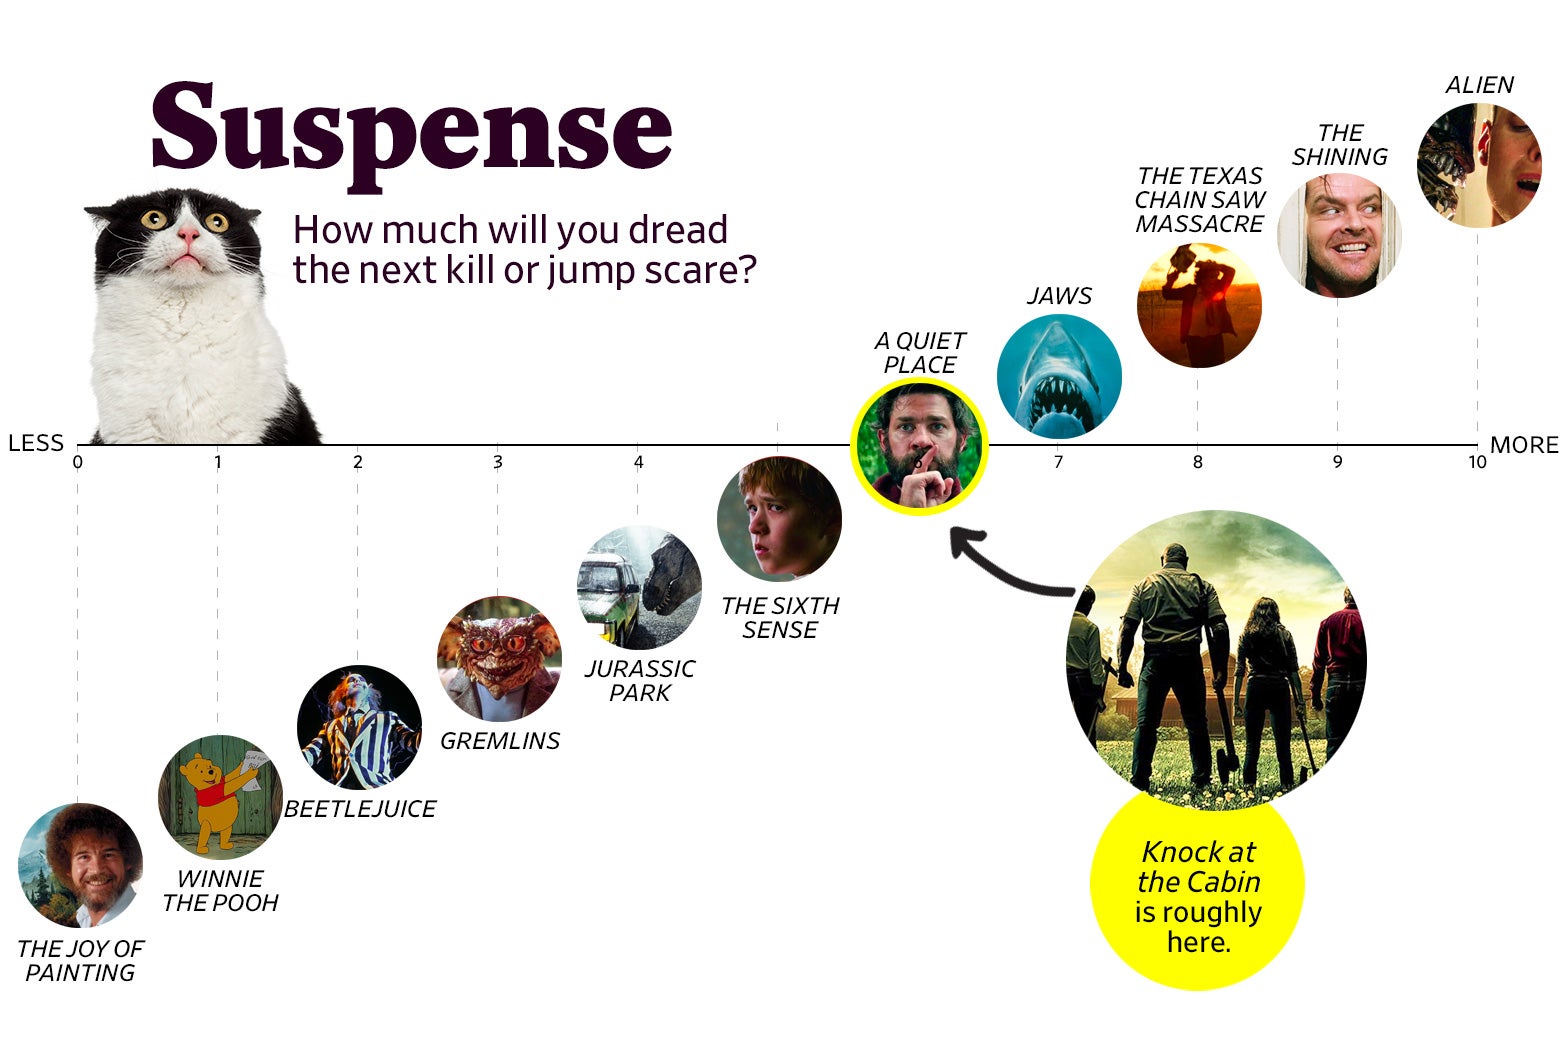 A chart titled “Suspense: How much will you dread the next kill or jump scare?” shows that Knock at the Cabin ranks a 6 in suspense, roughly the same as A Quiet Place. The scale ranges from The Joy of Painting (0) to Alien (10).  